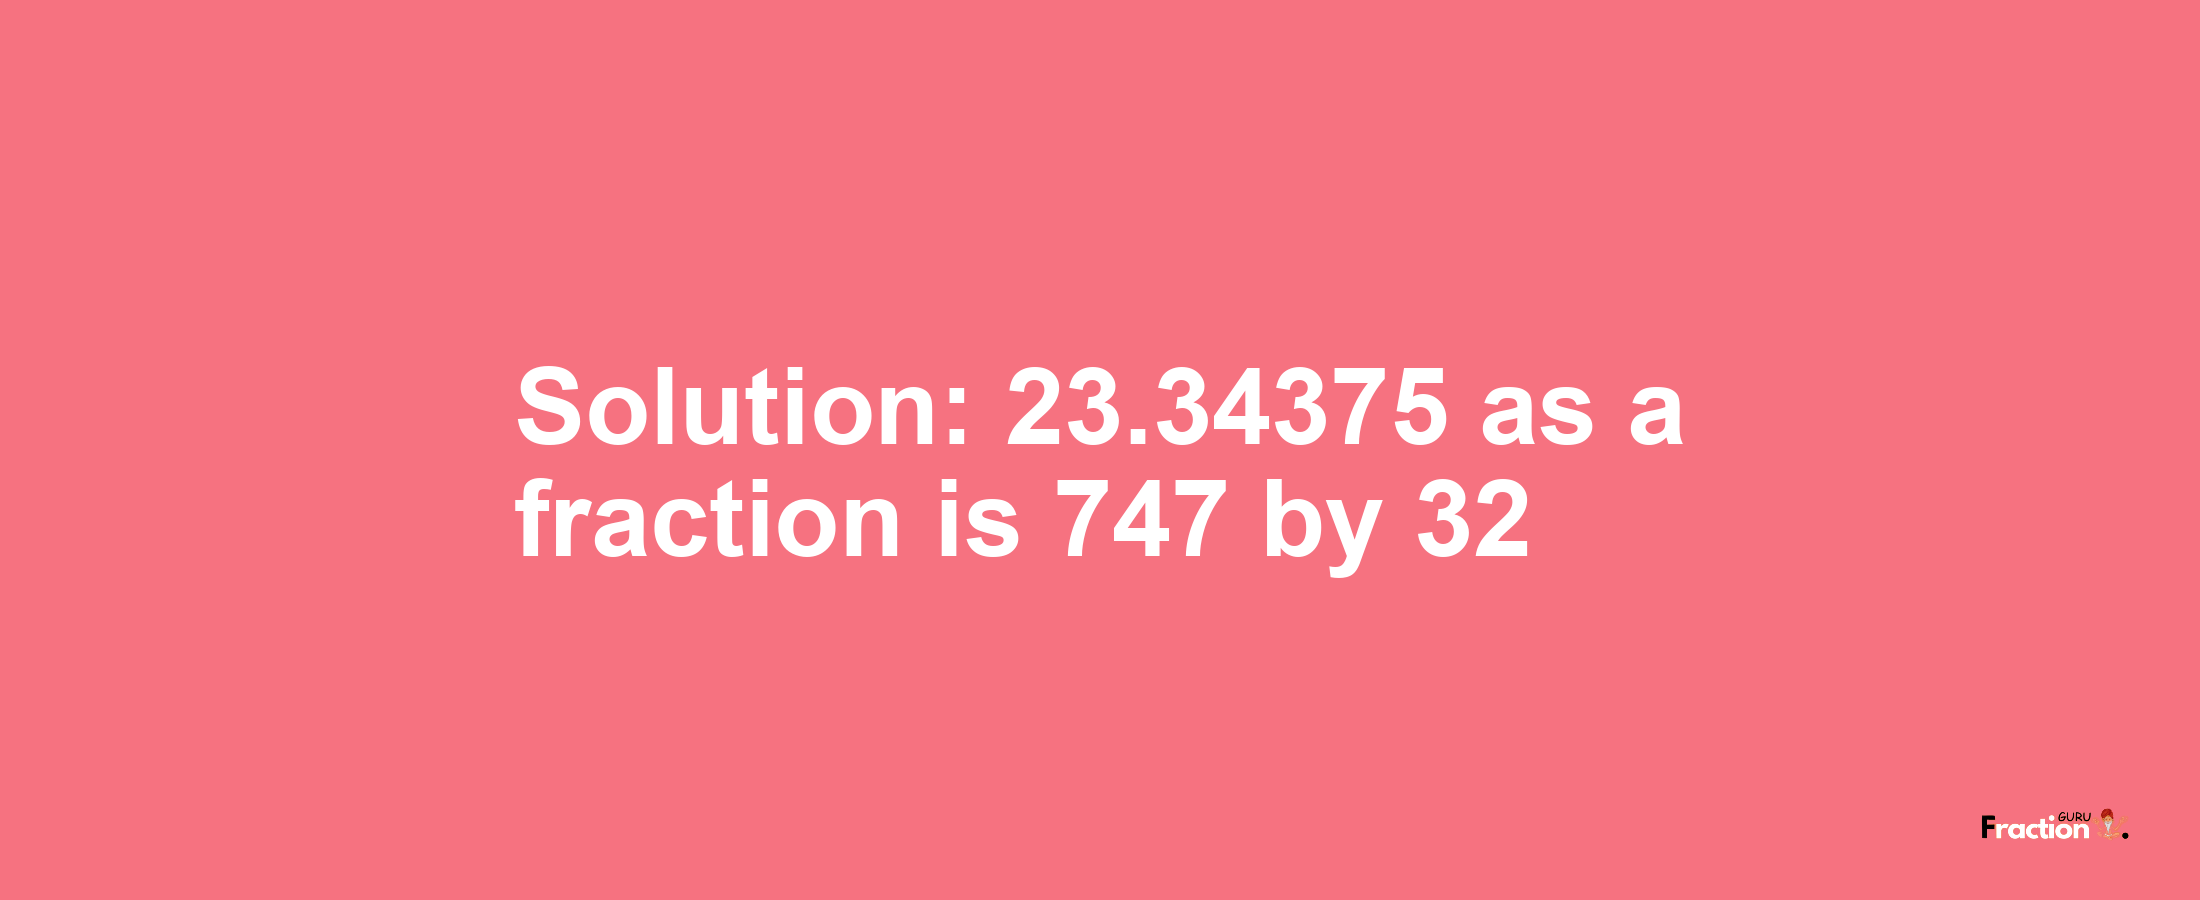 Solution:23.34375 as a fraction is 747/32